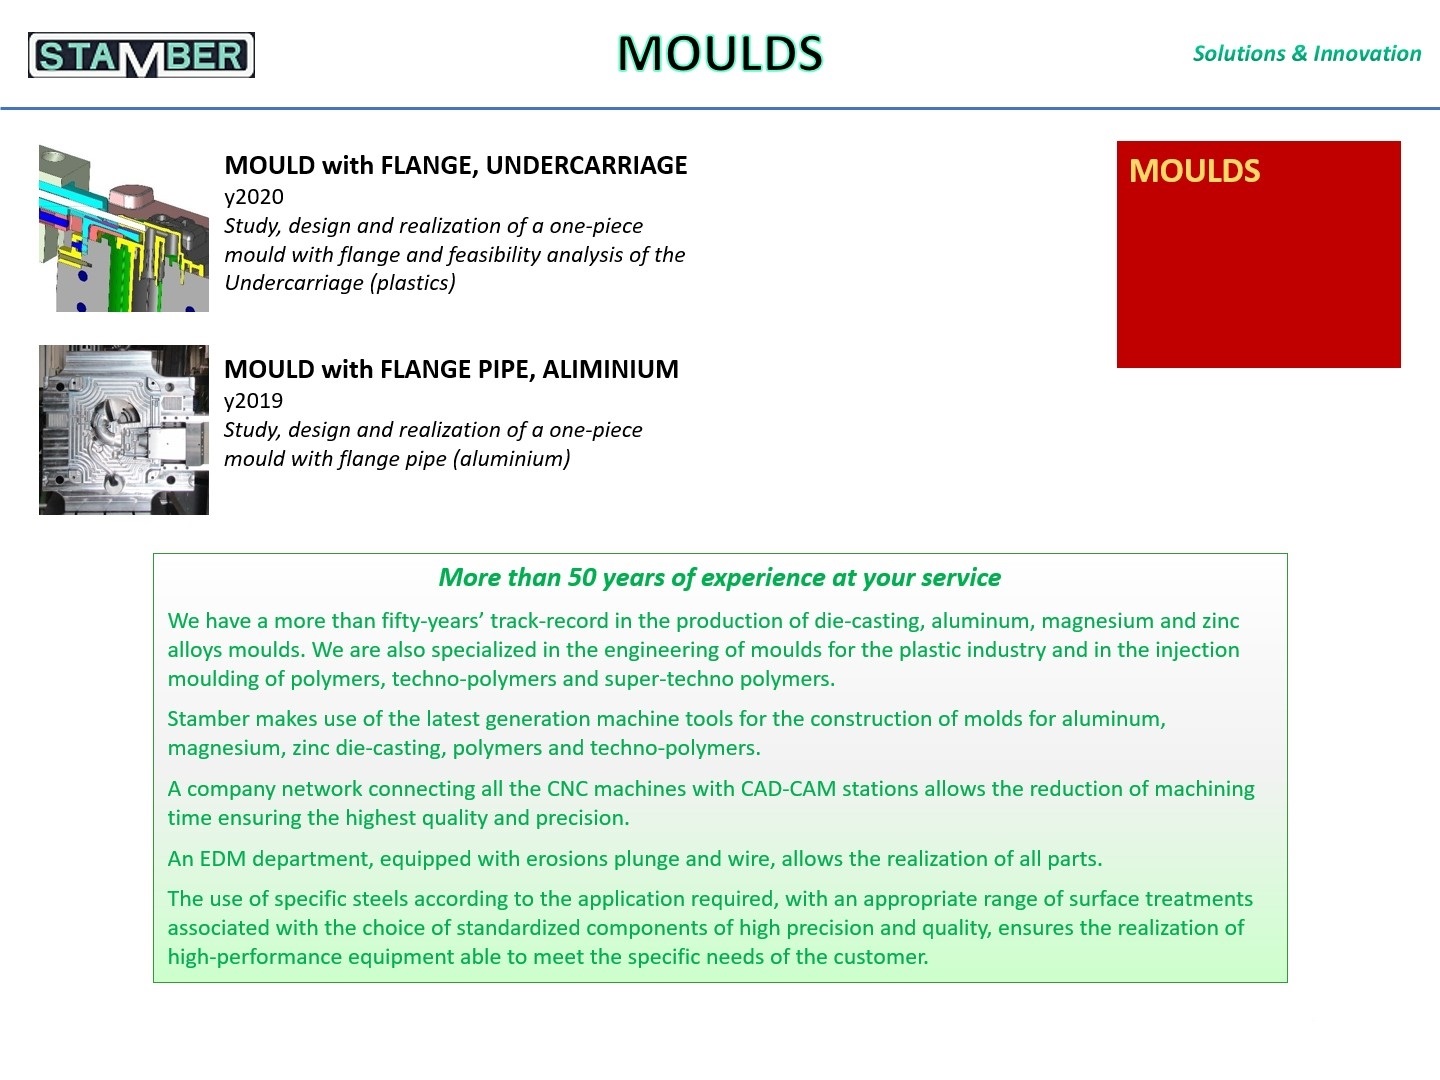 Ppp_STA-Consulting_Engineering-220606Moulds_M.jpg